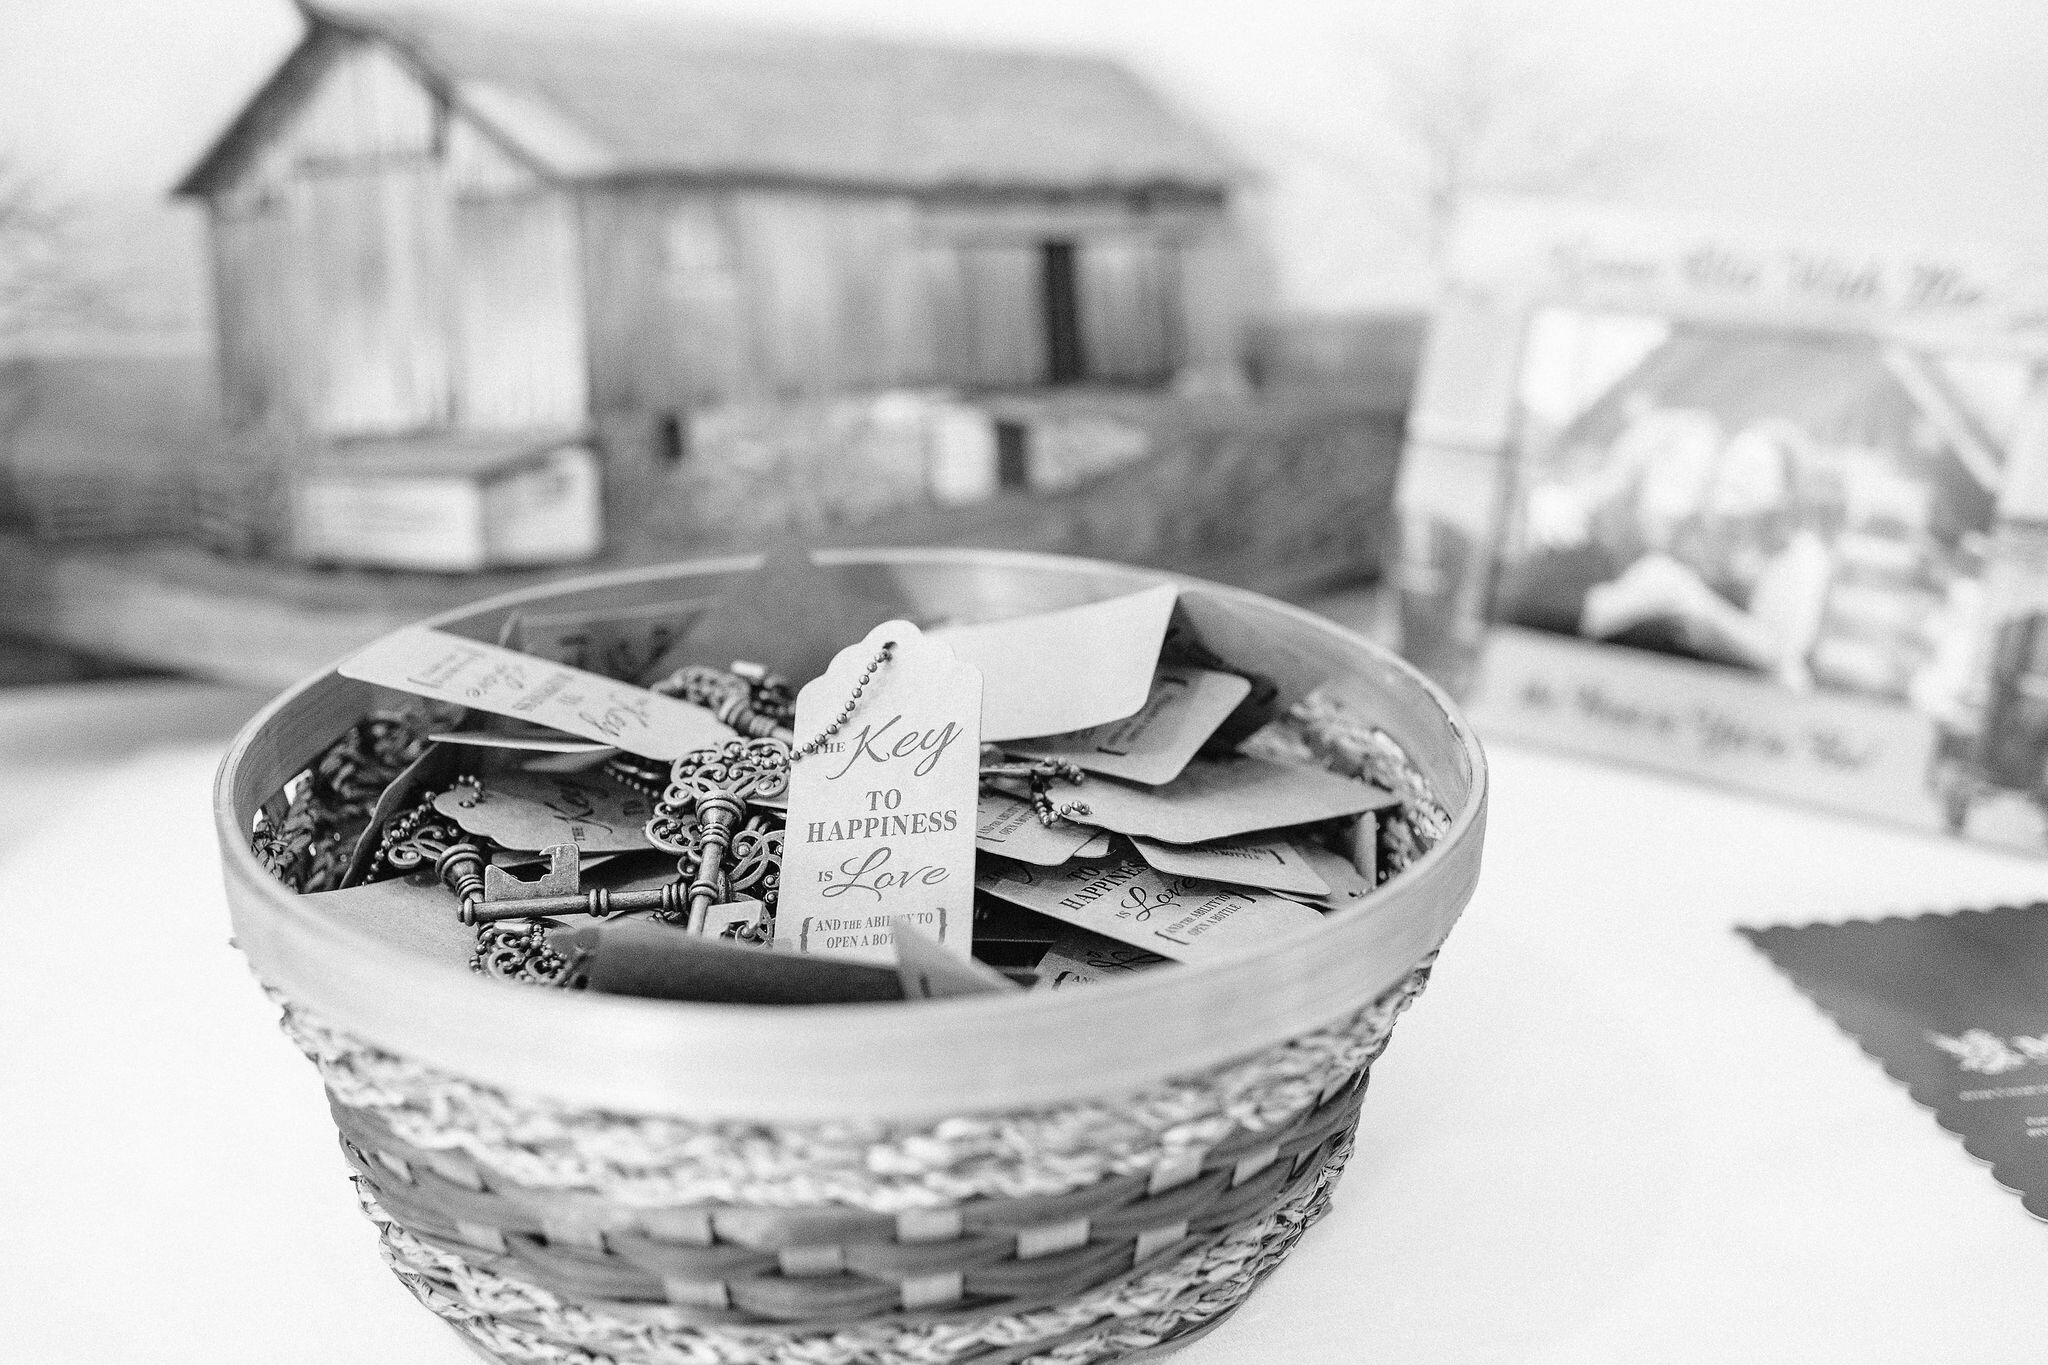 Basket of old fashioned keys with tag that reads "Key to Happiness"